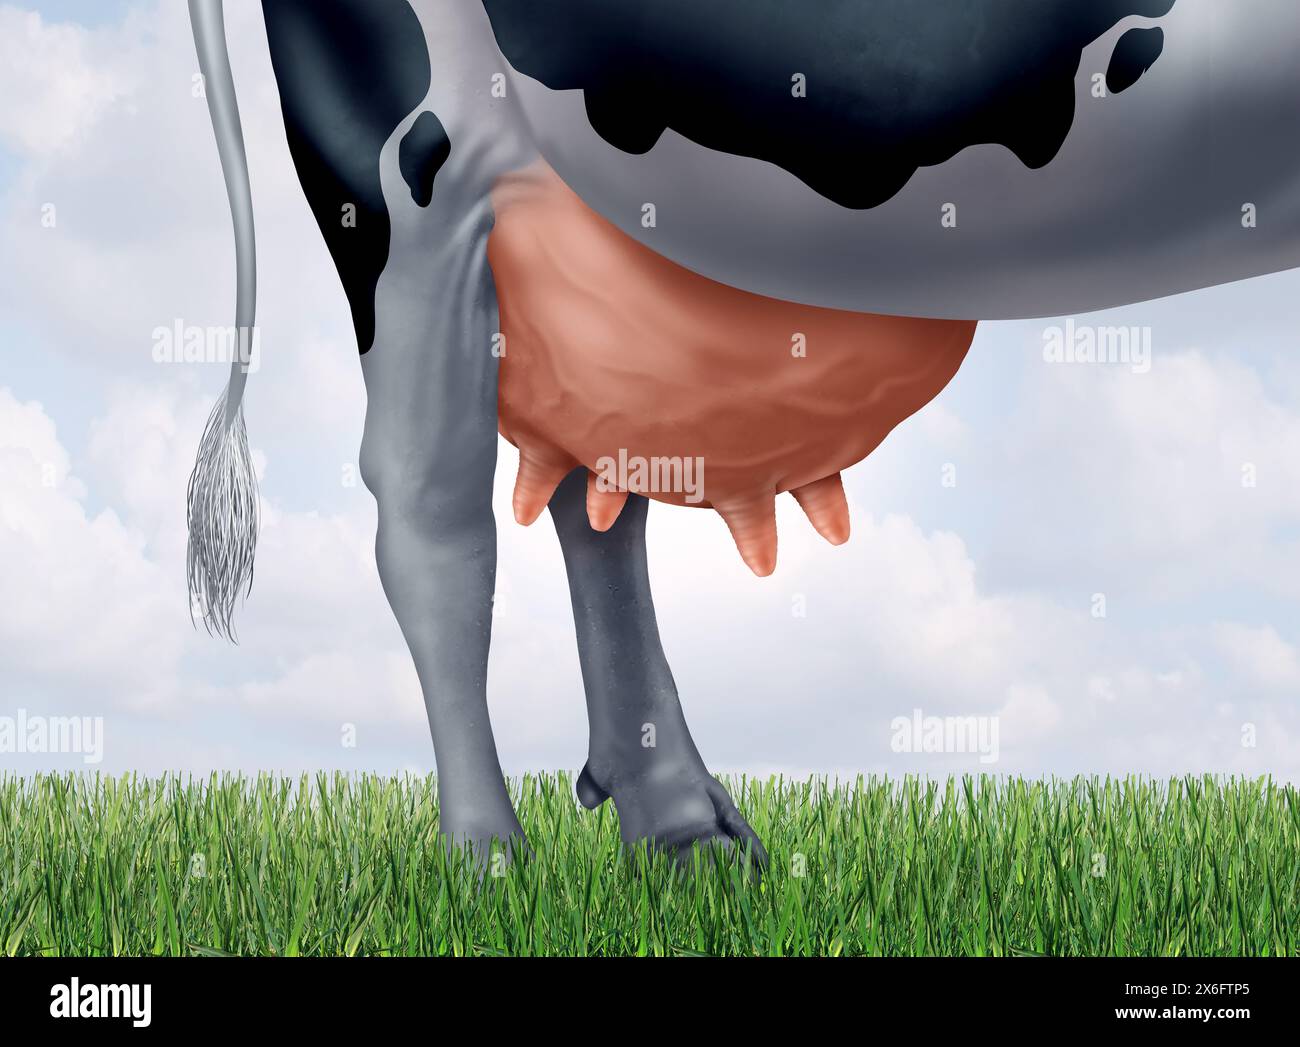 Dairy Farming Industry as Raw milk female bovine representing agricultural milking cows producing cheese butter and yogurt products as a cow with larg Stock Photo